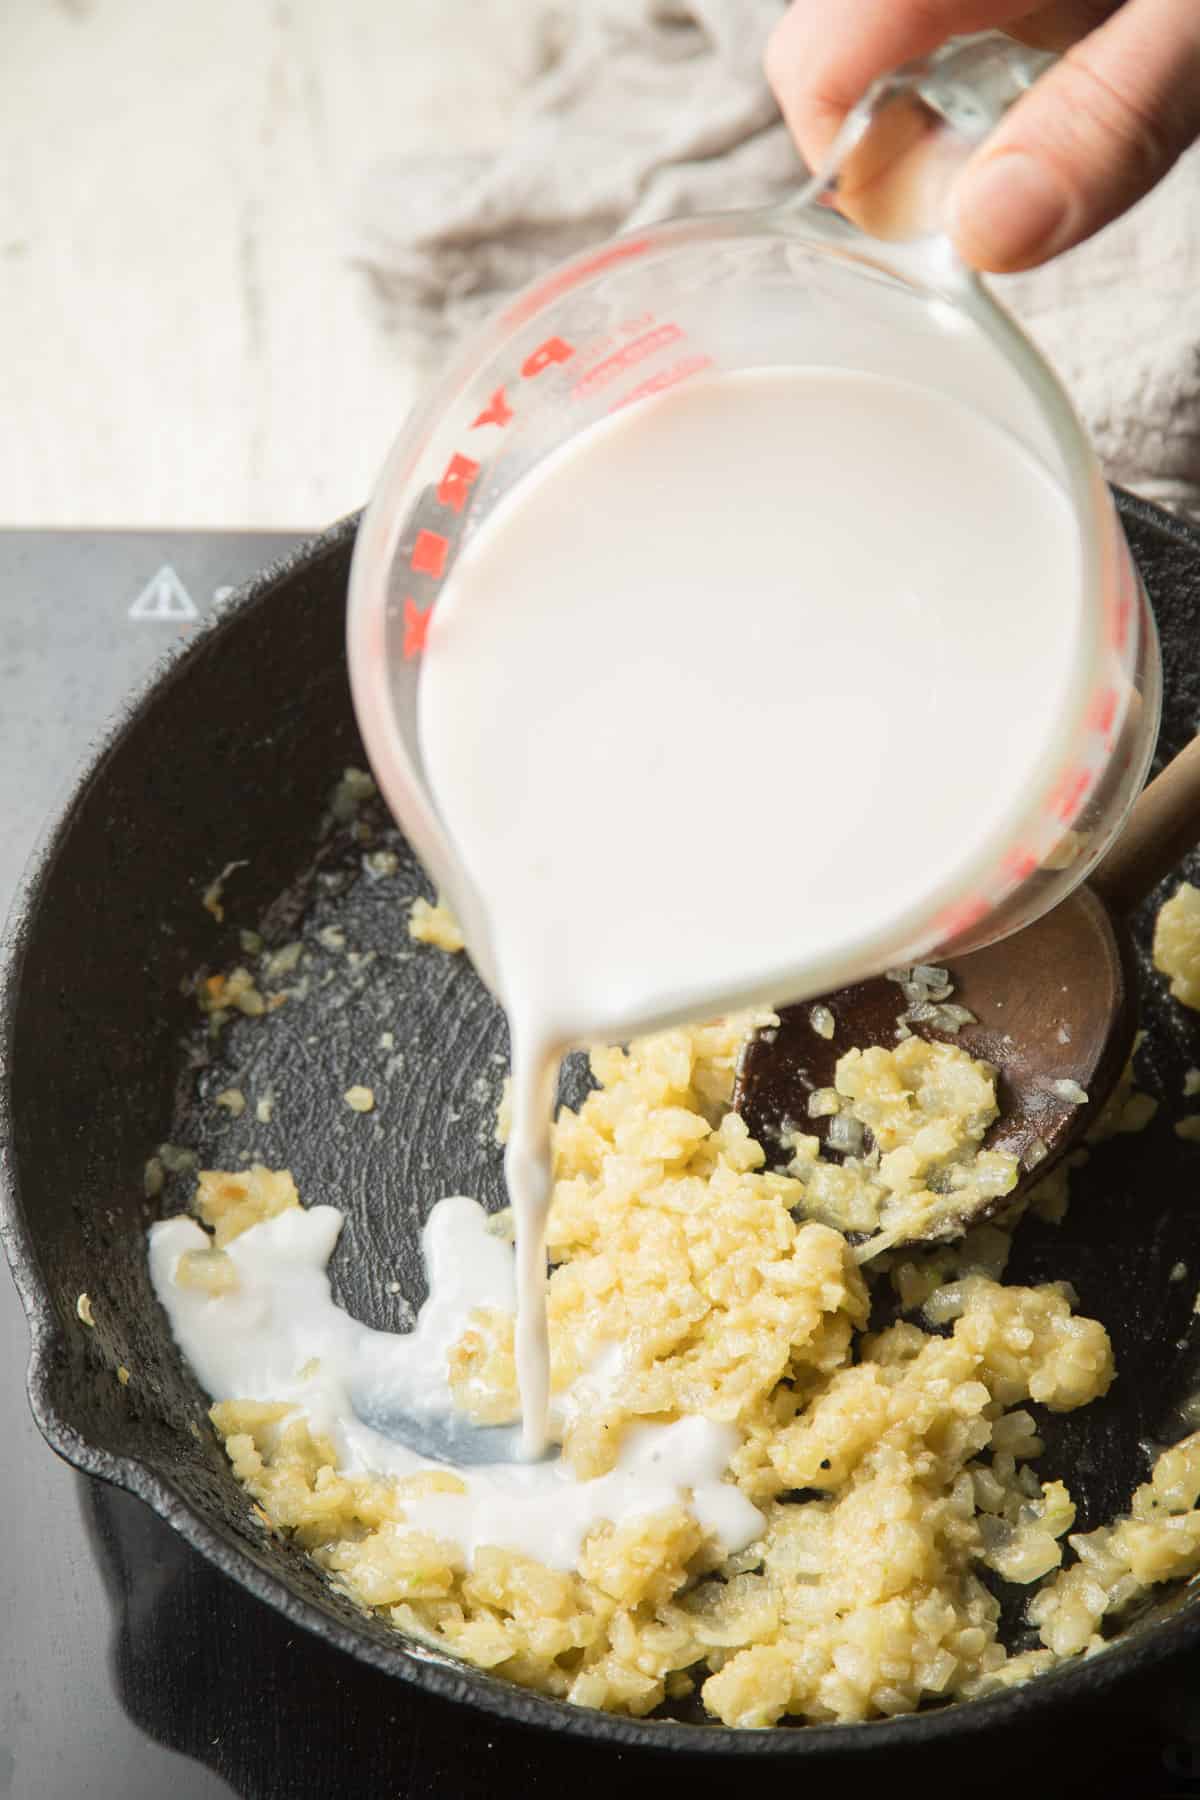 Hand pouring non-dairy milk into a skillet of sauteed onion and flour.